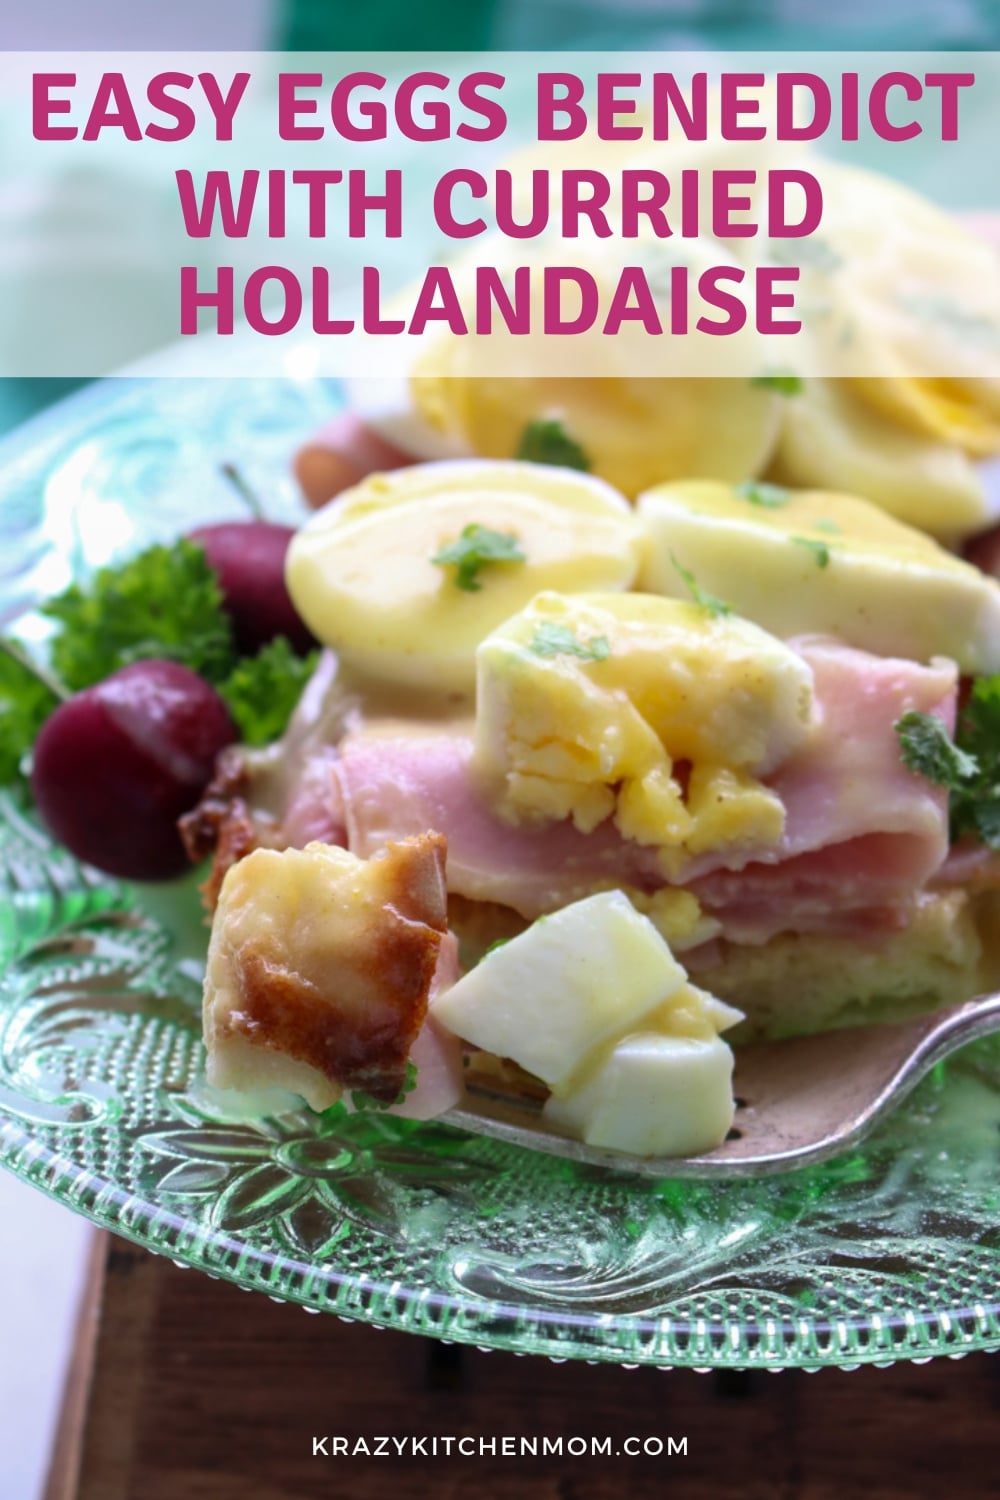 Enjoy an easy breakfast recipe with a twist – make Eggs Benedict with a delicious Curried Hollandaise sauce. Ready in under 30 minutes. via @krazykitchenmom